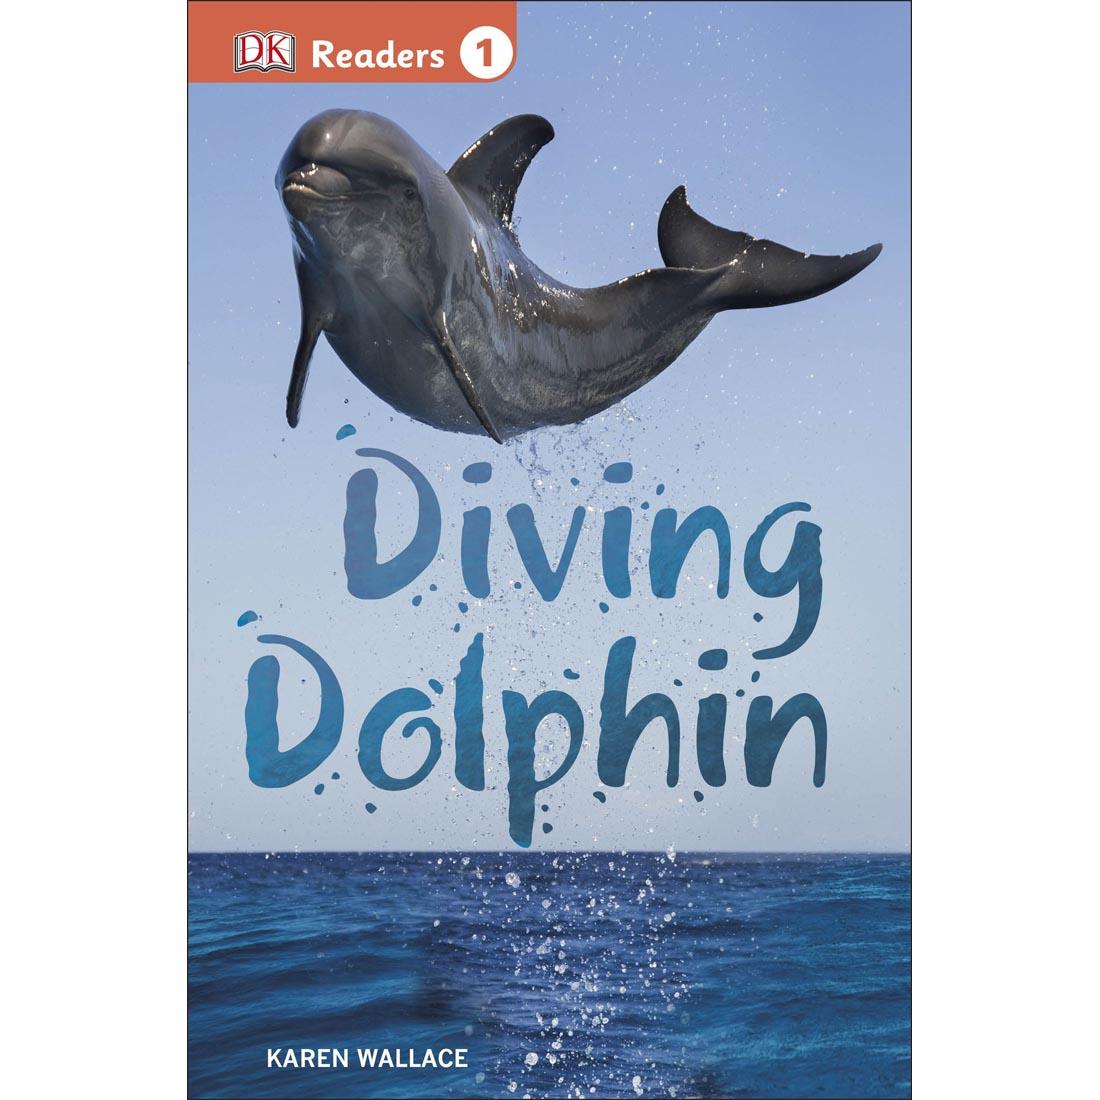 DK Readers Level 1 Book: Diving Dolphins